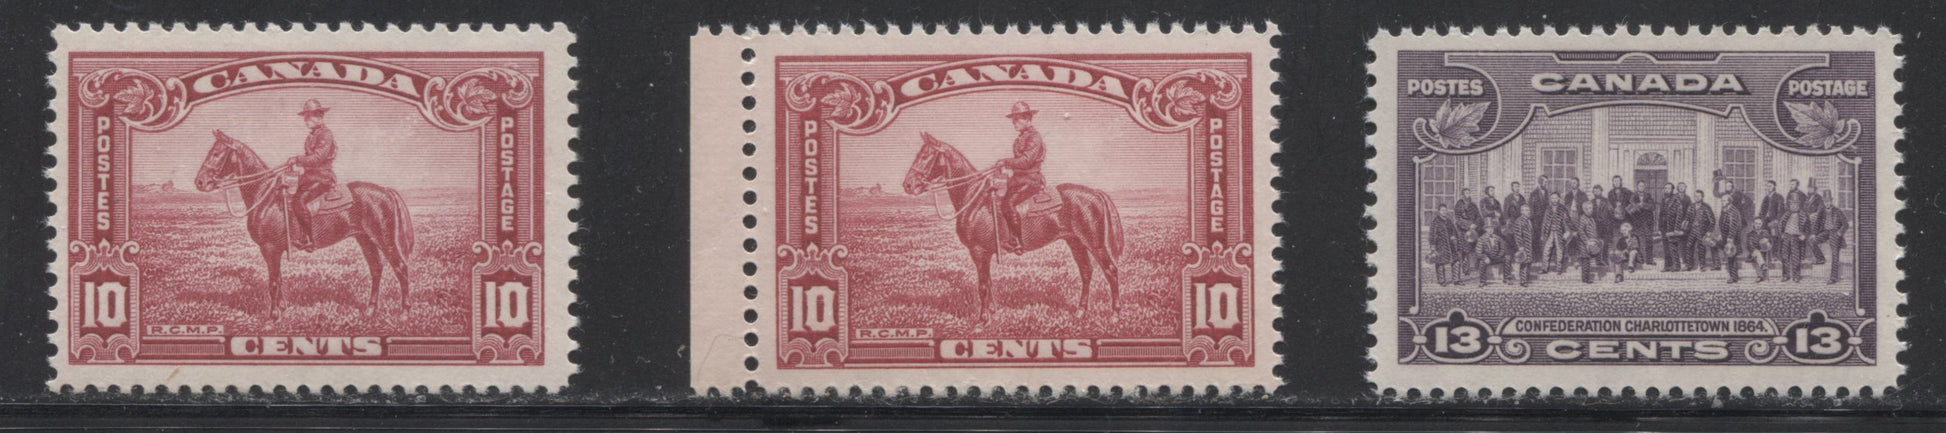 Canada #223-226 1935-1937 Dated Die Issue - Specialized Lot of 10 Mostly All VF NH High Value Stamps Brixton Chrome 